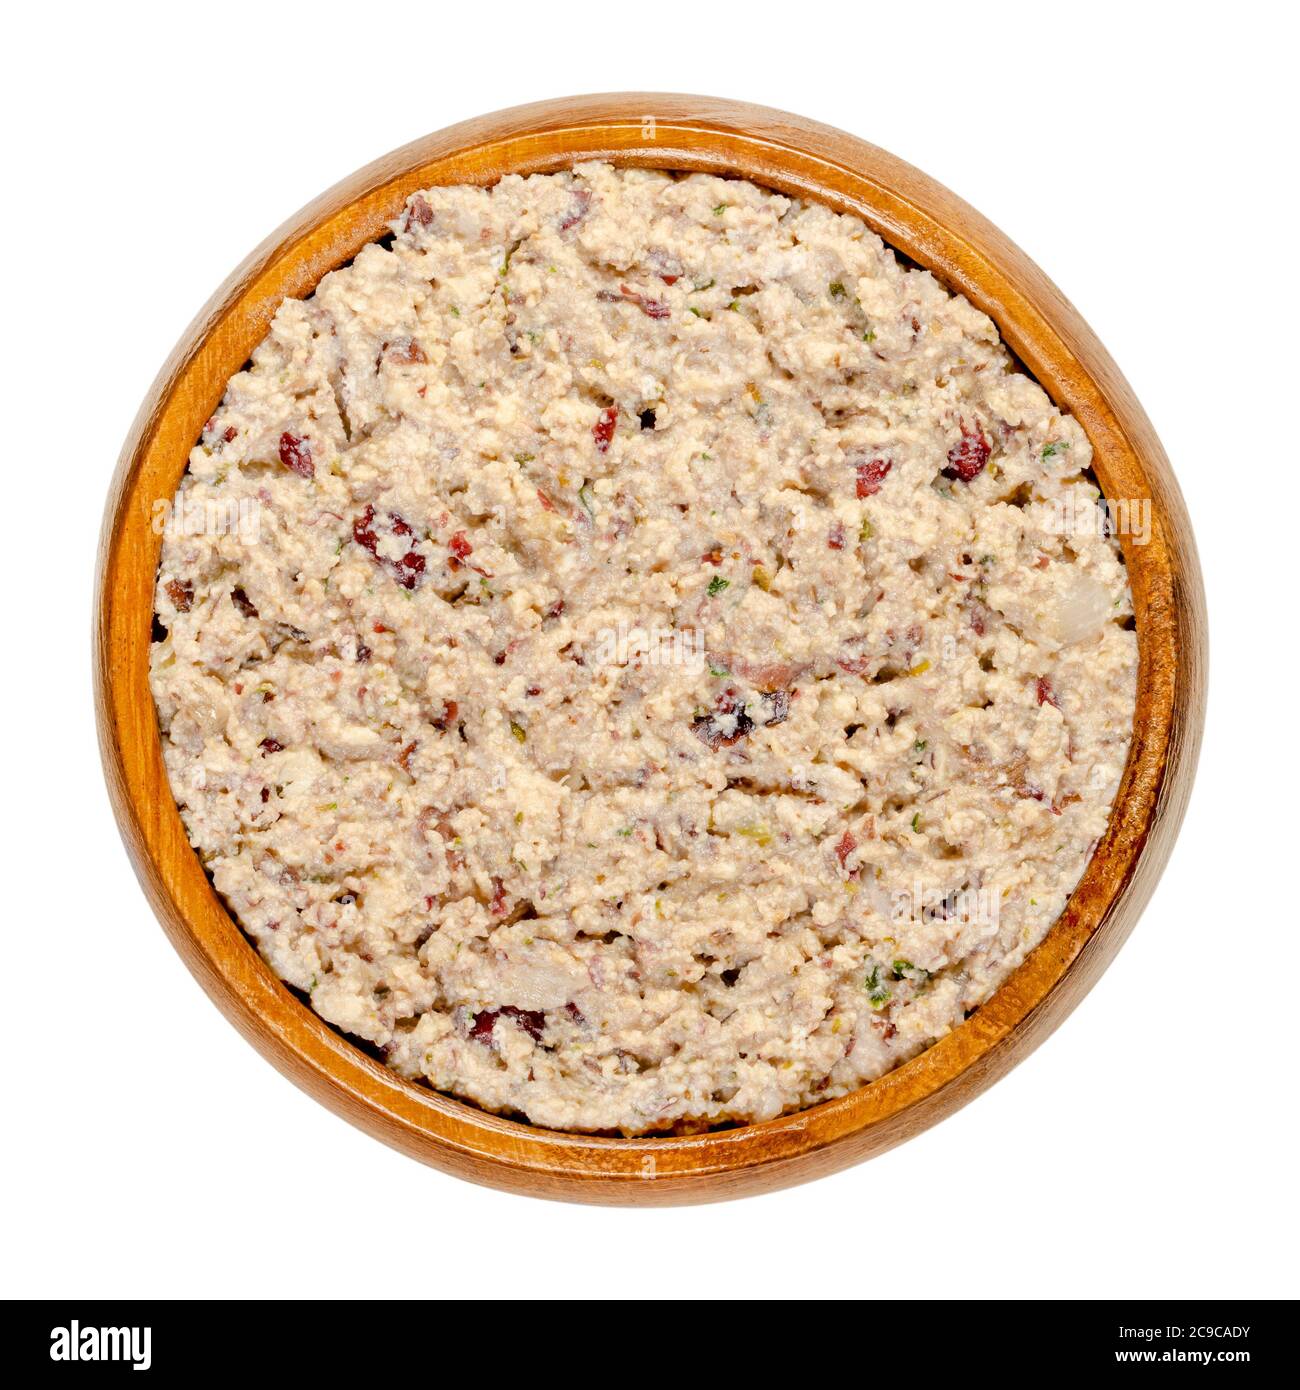 Vegan spread in a wooden bowl. Made of smoked tofu, kidney beans, roasted onions, herbs, salt and pepper. Paste that can be spread onto bread. Stock Photo